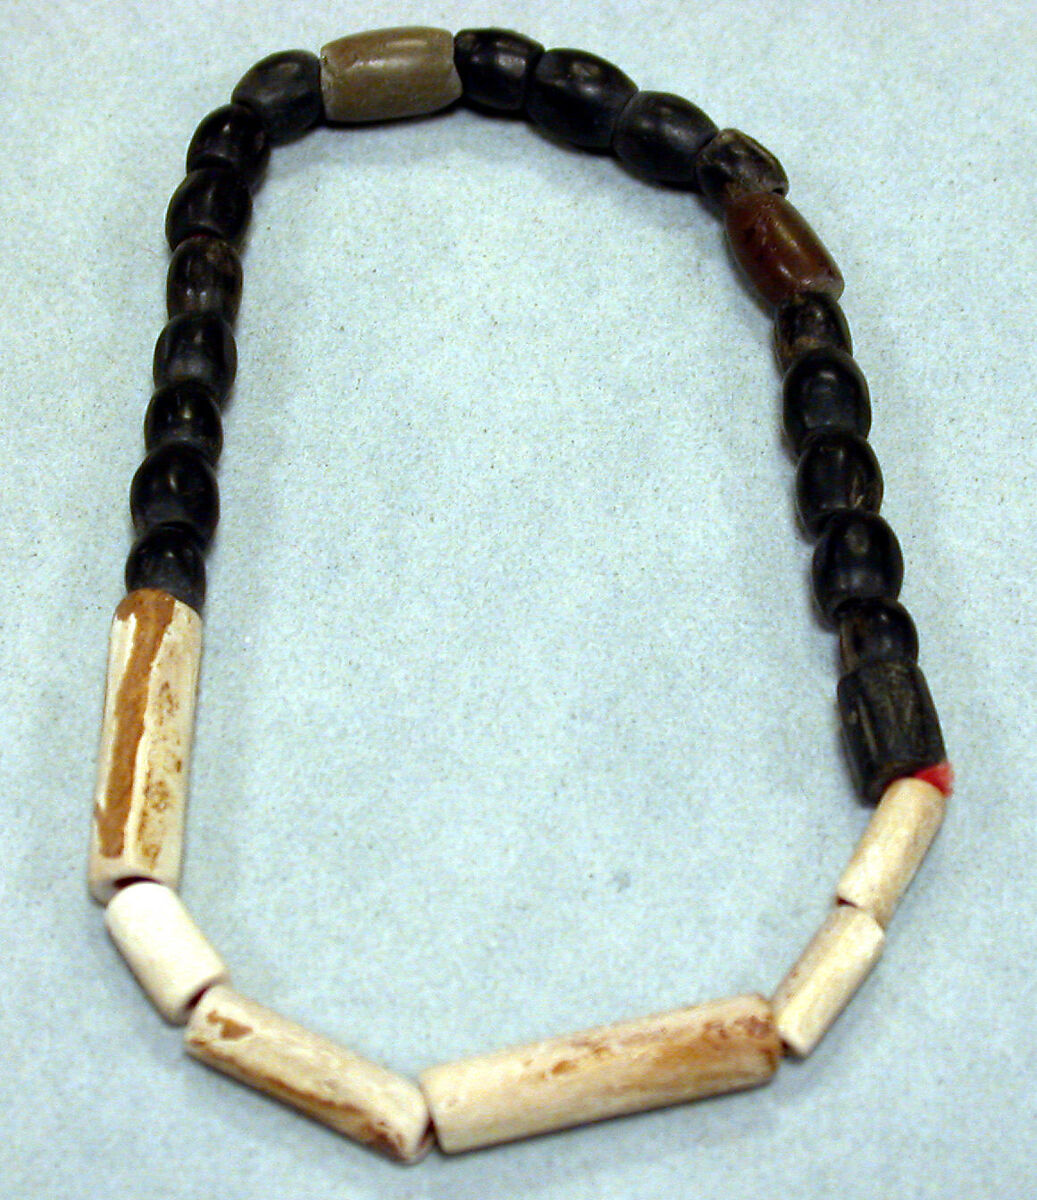 Necklace of Stone and Shell Beads, Stone, shell, Peru; north coast (?) 